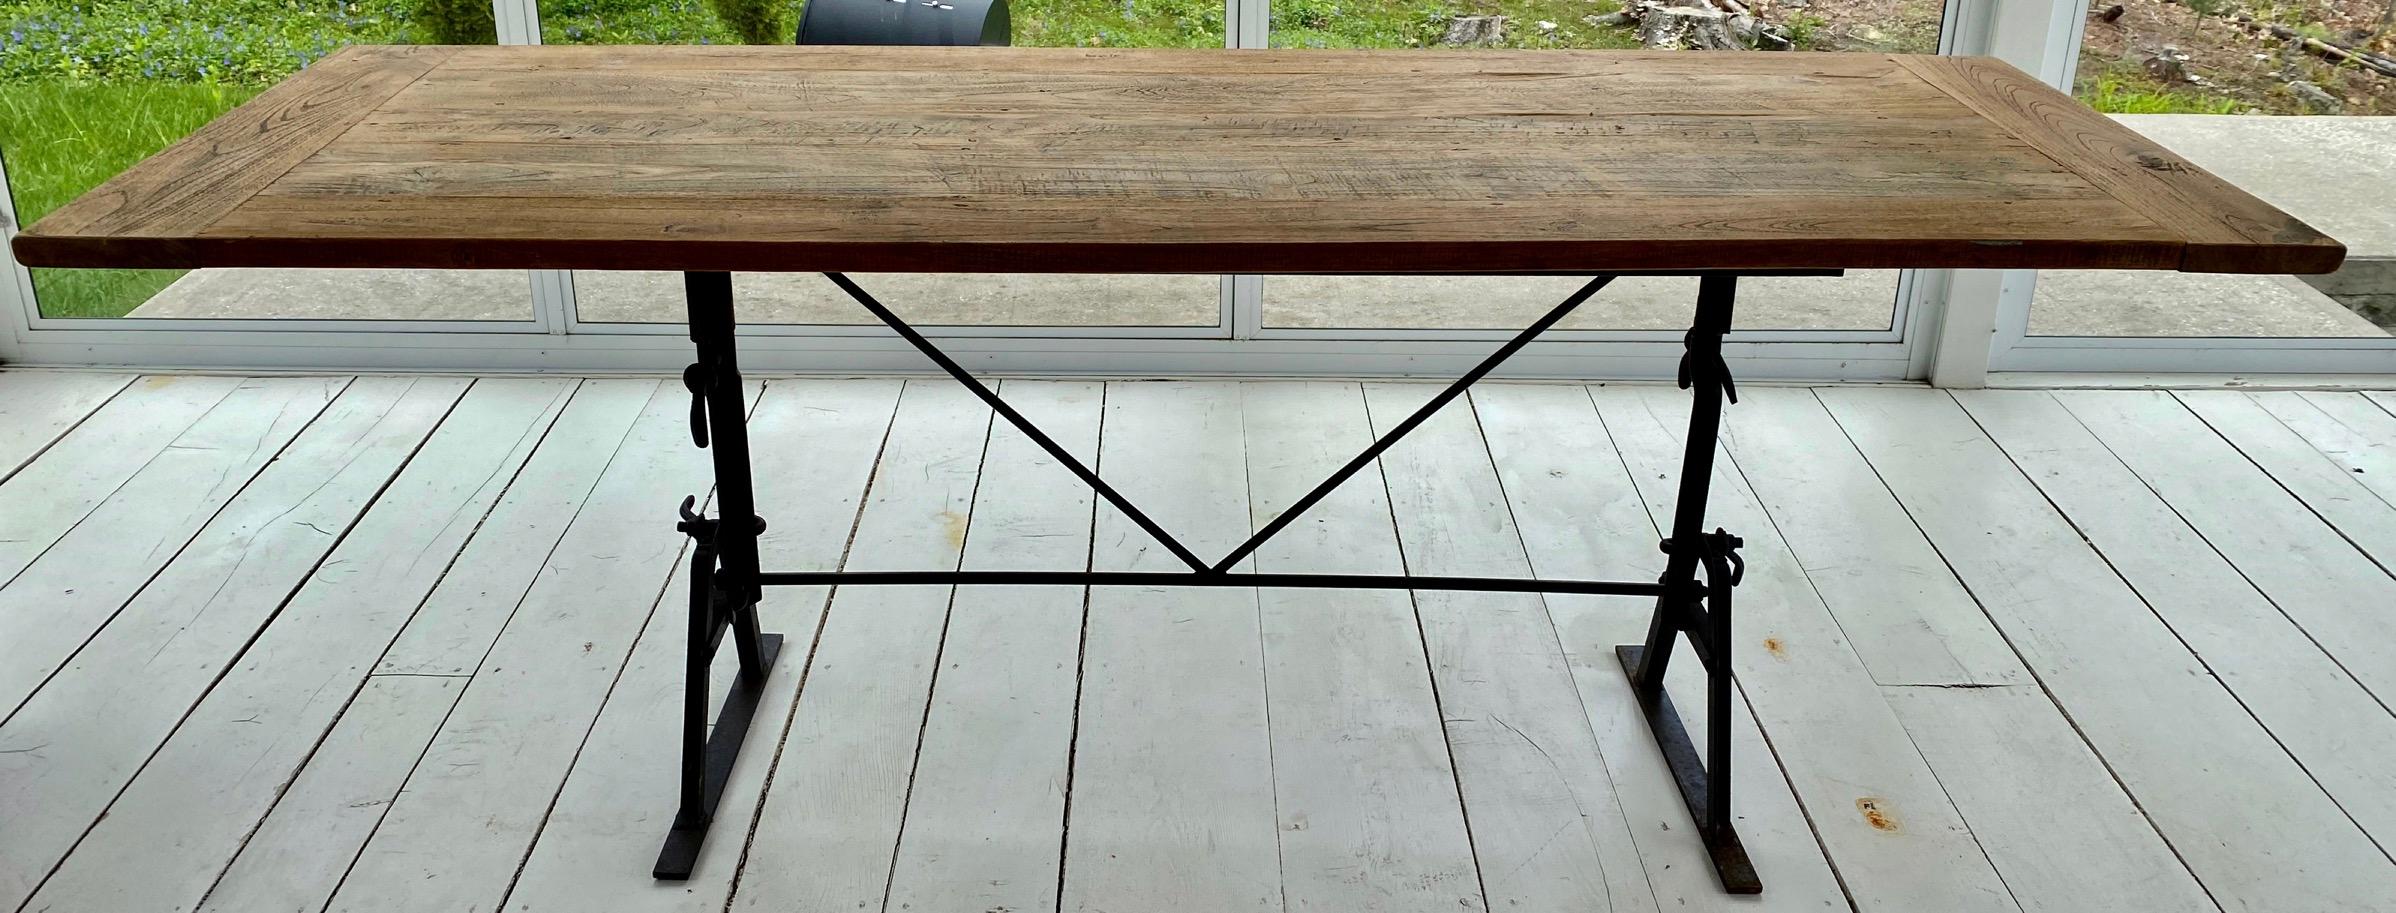 This industrial table base made from a pair of antique saw horses will make a great desk, office, writing table, a dining table in the kitchen, garden, porch or patio. The table has a teak plank top but can be sold separately for you to put a top of